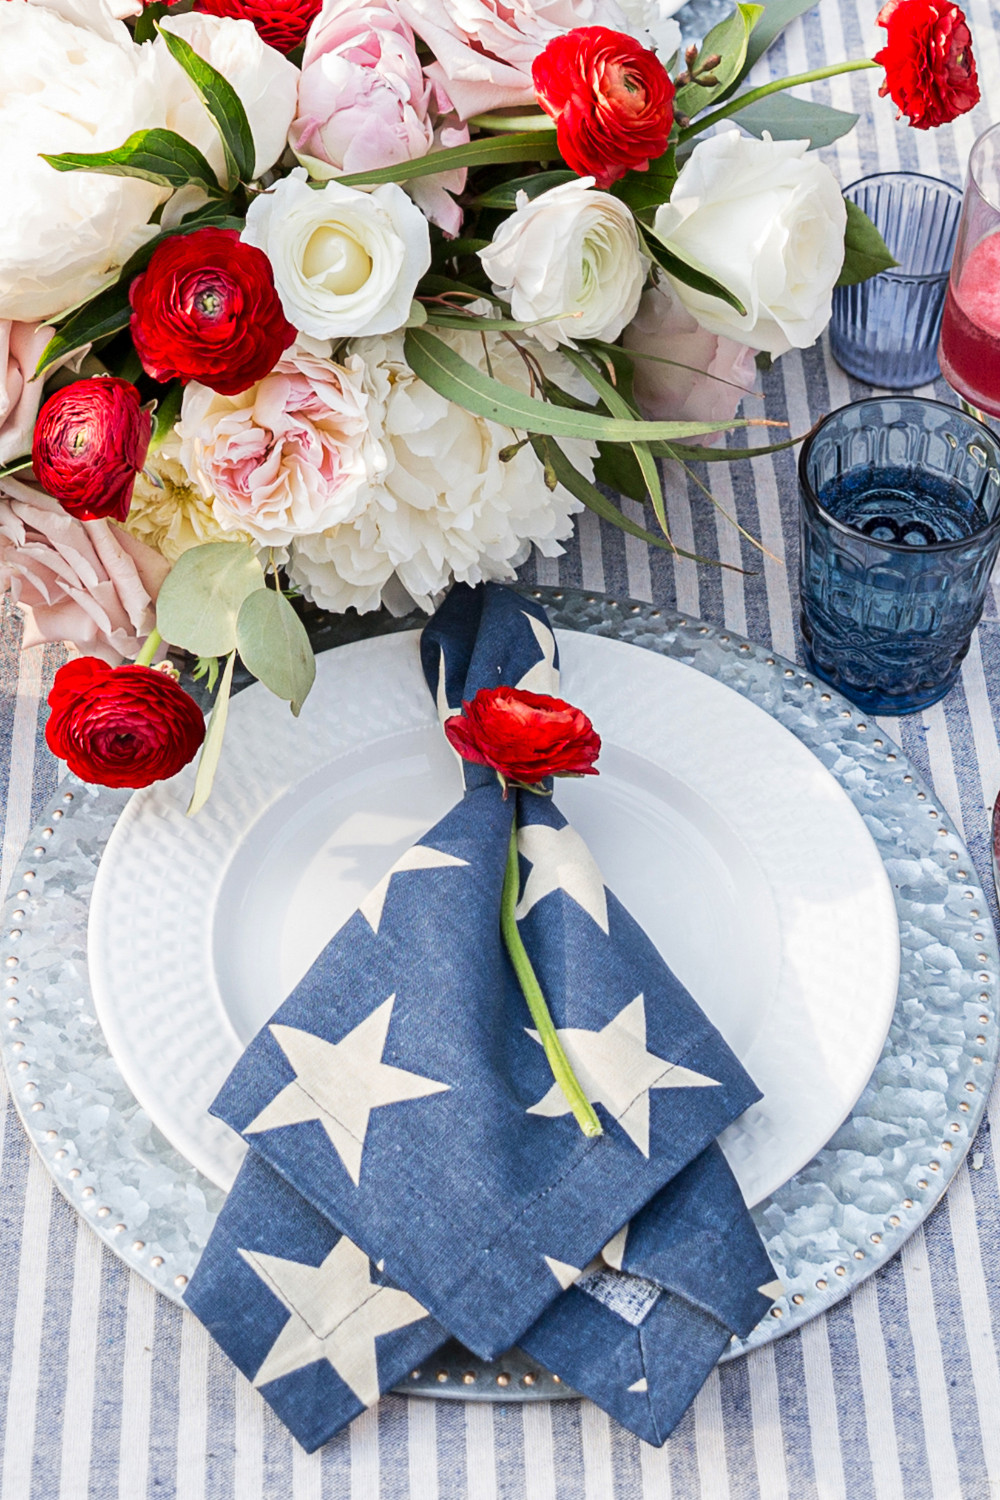 Red, White and Blue: Awesome and elegant patriotic decorations for a 4th of July theme bridal shower. // Proper table setting for a chic Americana party. // mysweetengagement.com